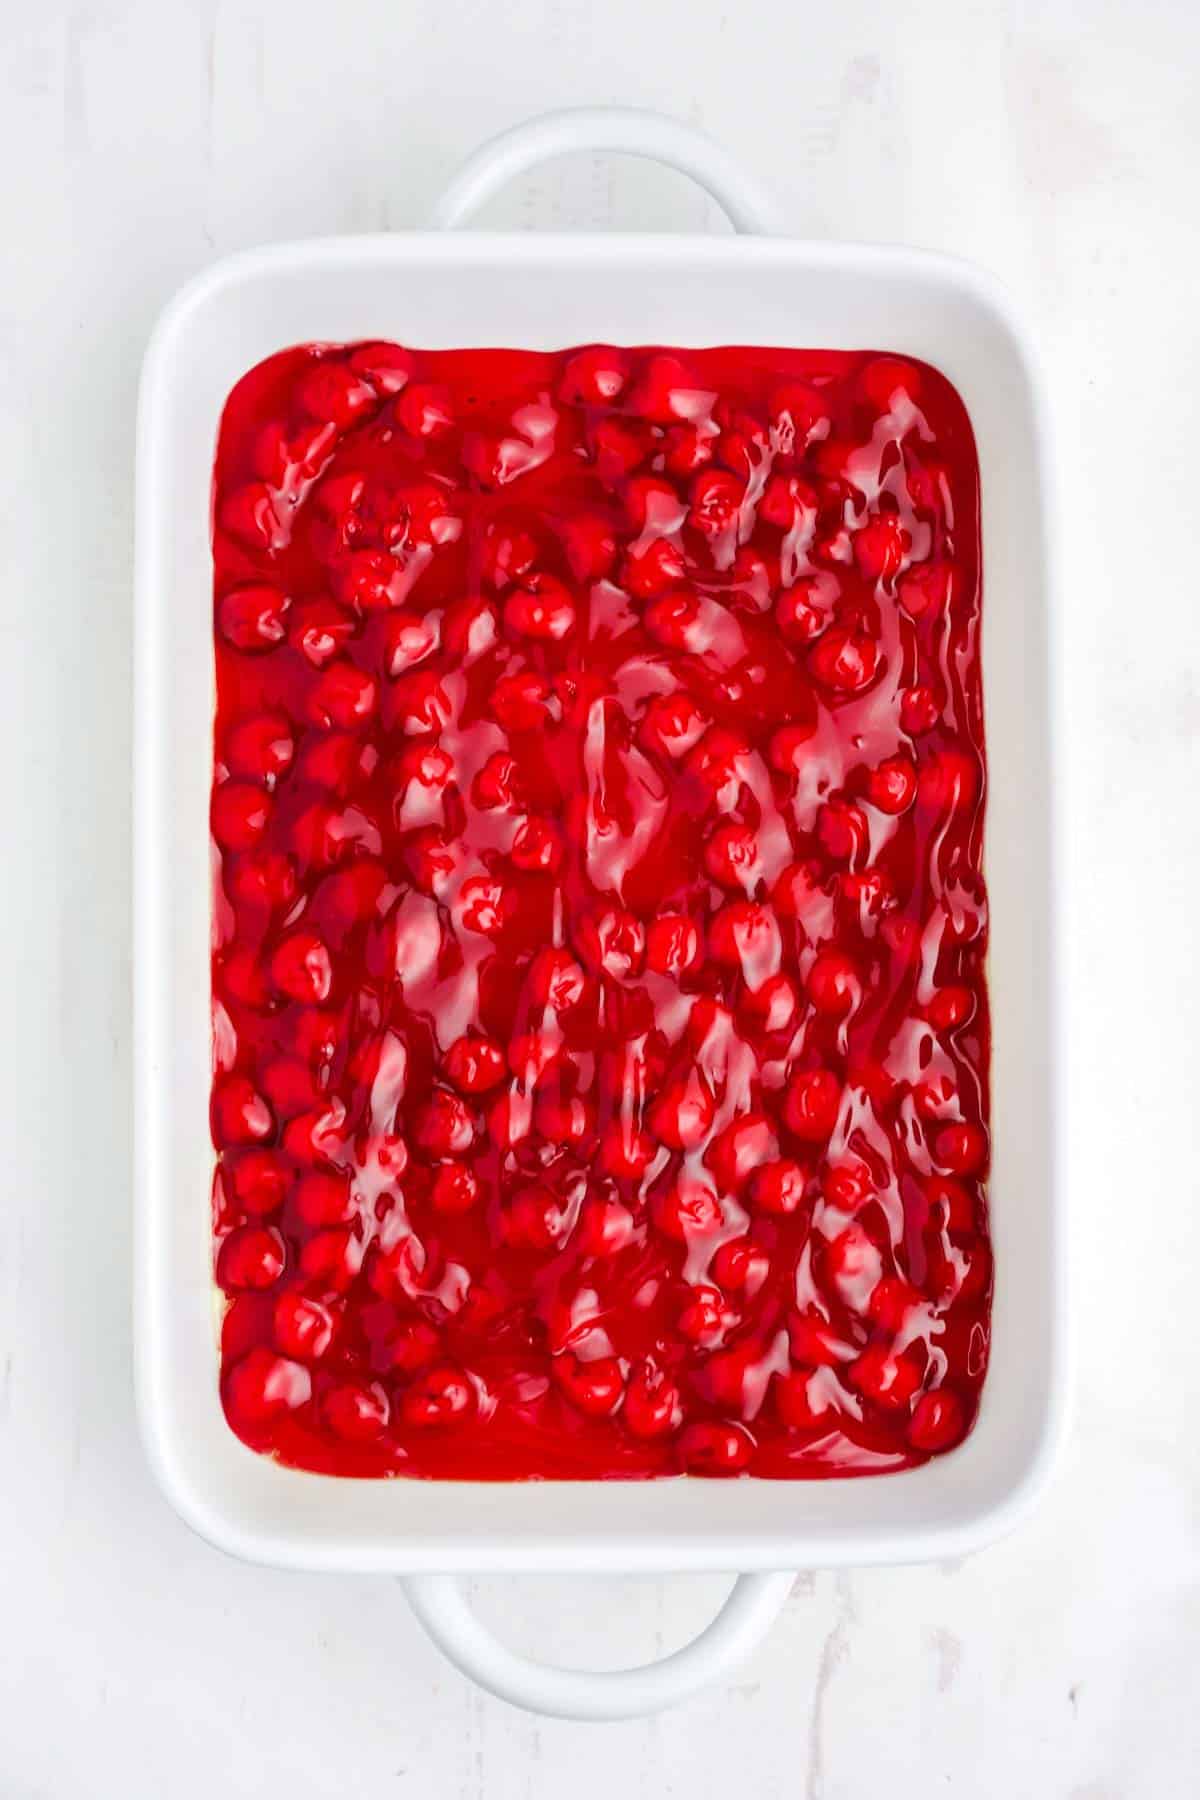 Cherry filling spread out in the bottom of the cooking dish.